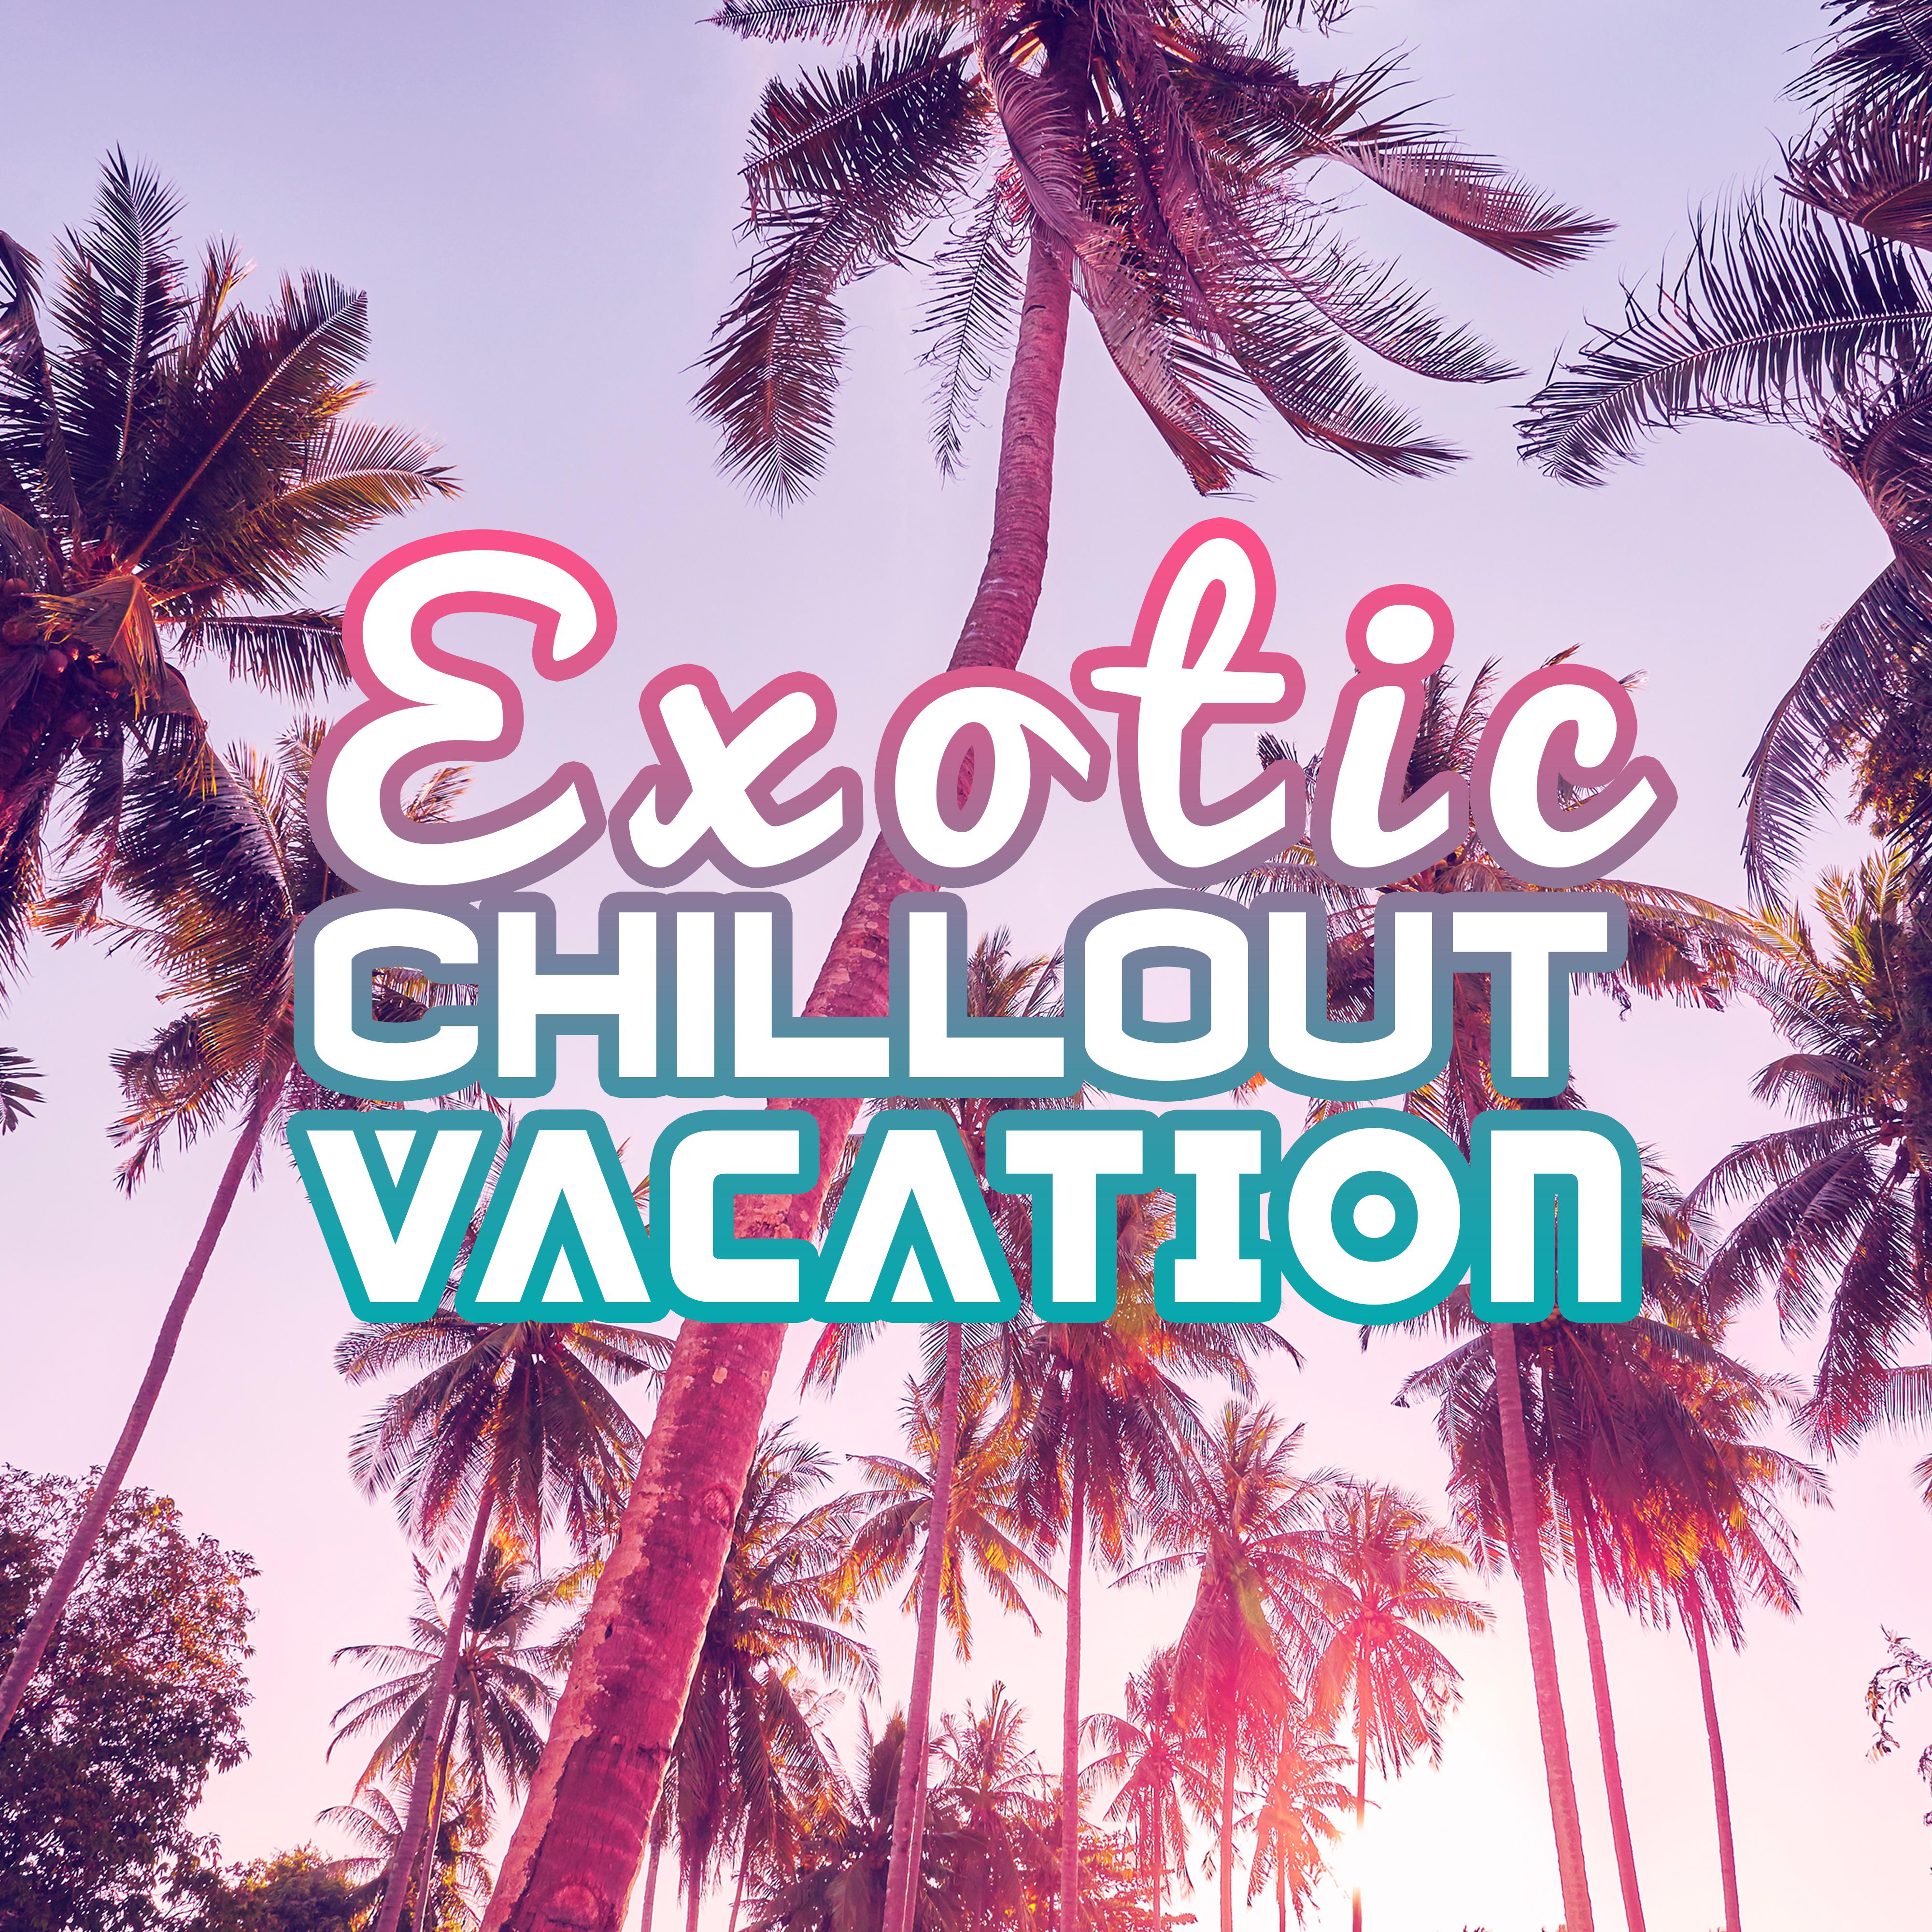 Exotic Chillout Vacation – Sun & Sand Music Compilation, Summer Rest & Relax